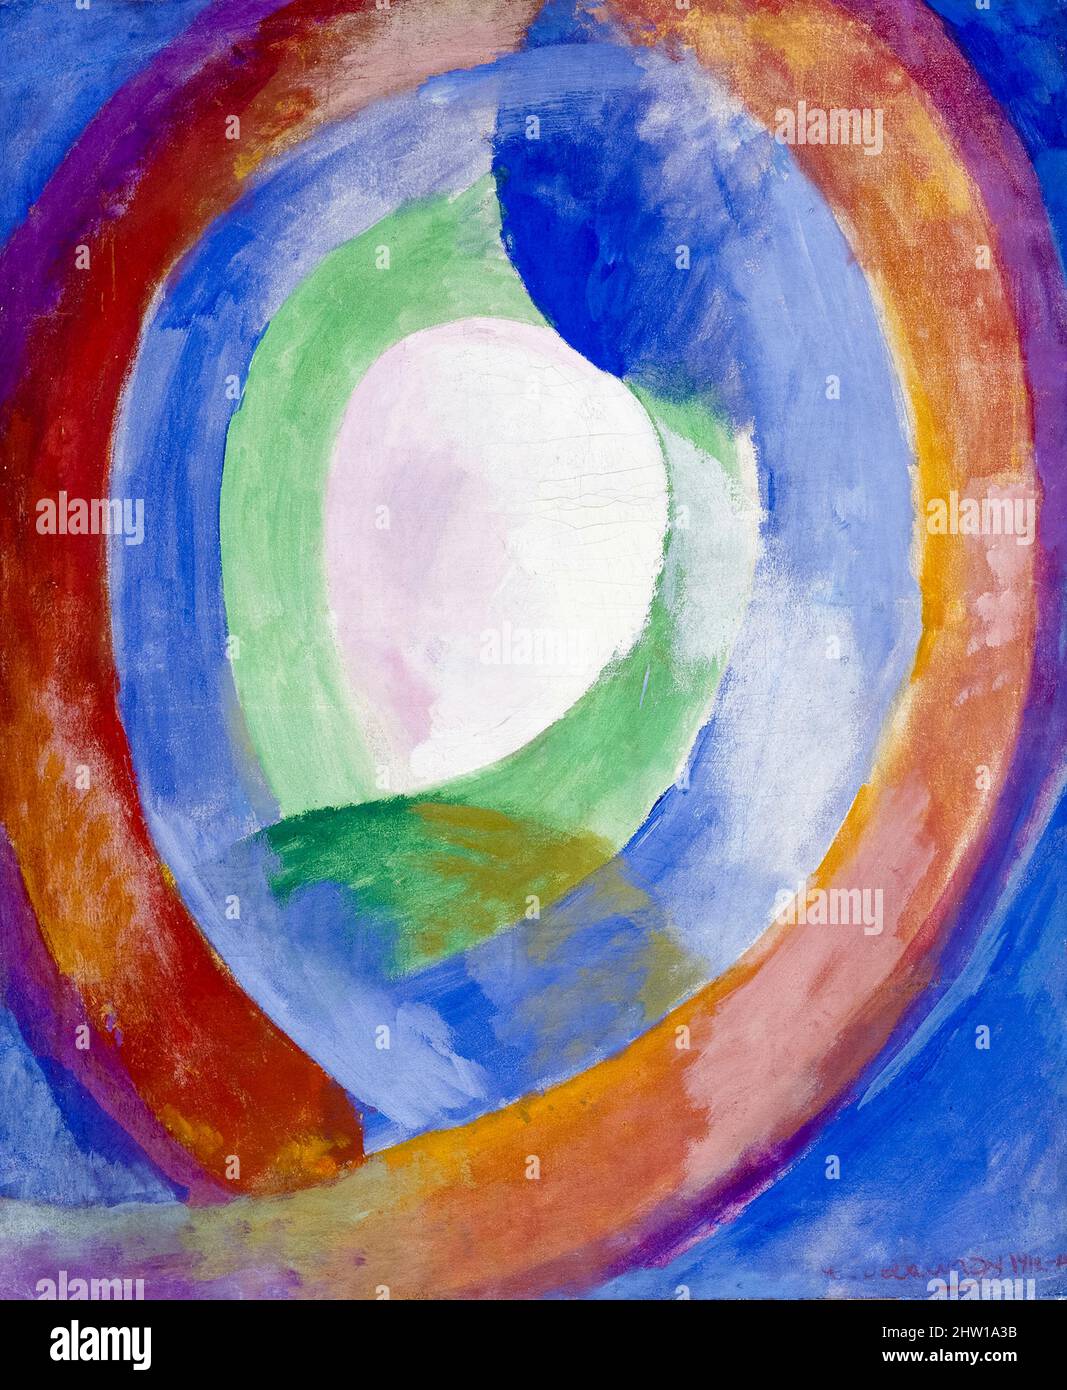 Robert Delaunay, Formes circulaires, lune No. 1, abstract painting in oil on canvas, 1913 Stock Photo